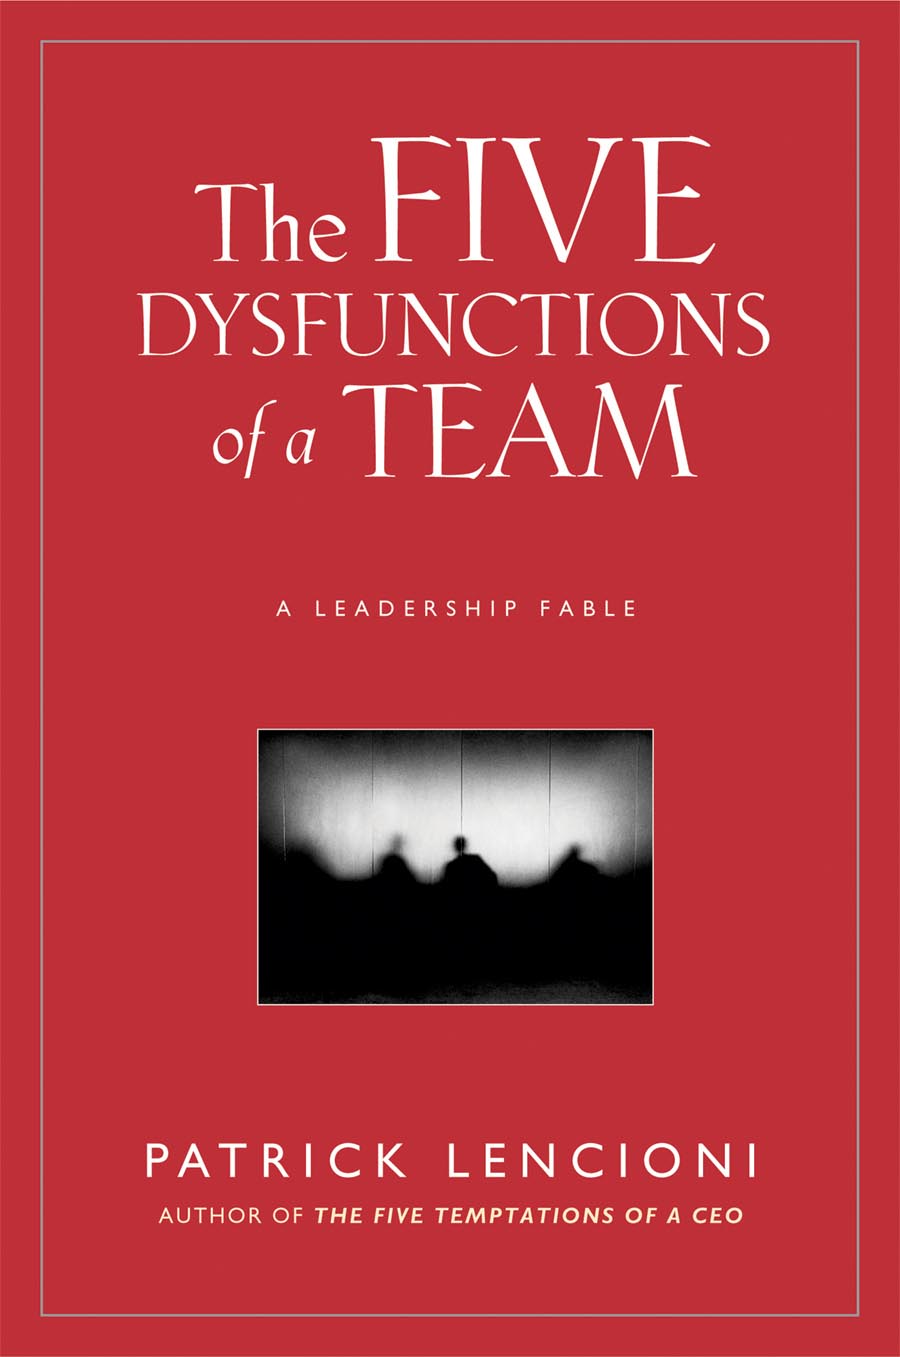 The Five Dysfunctions of a Team PDF ebook by Patrick Lencioni free download